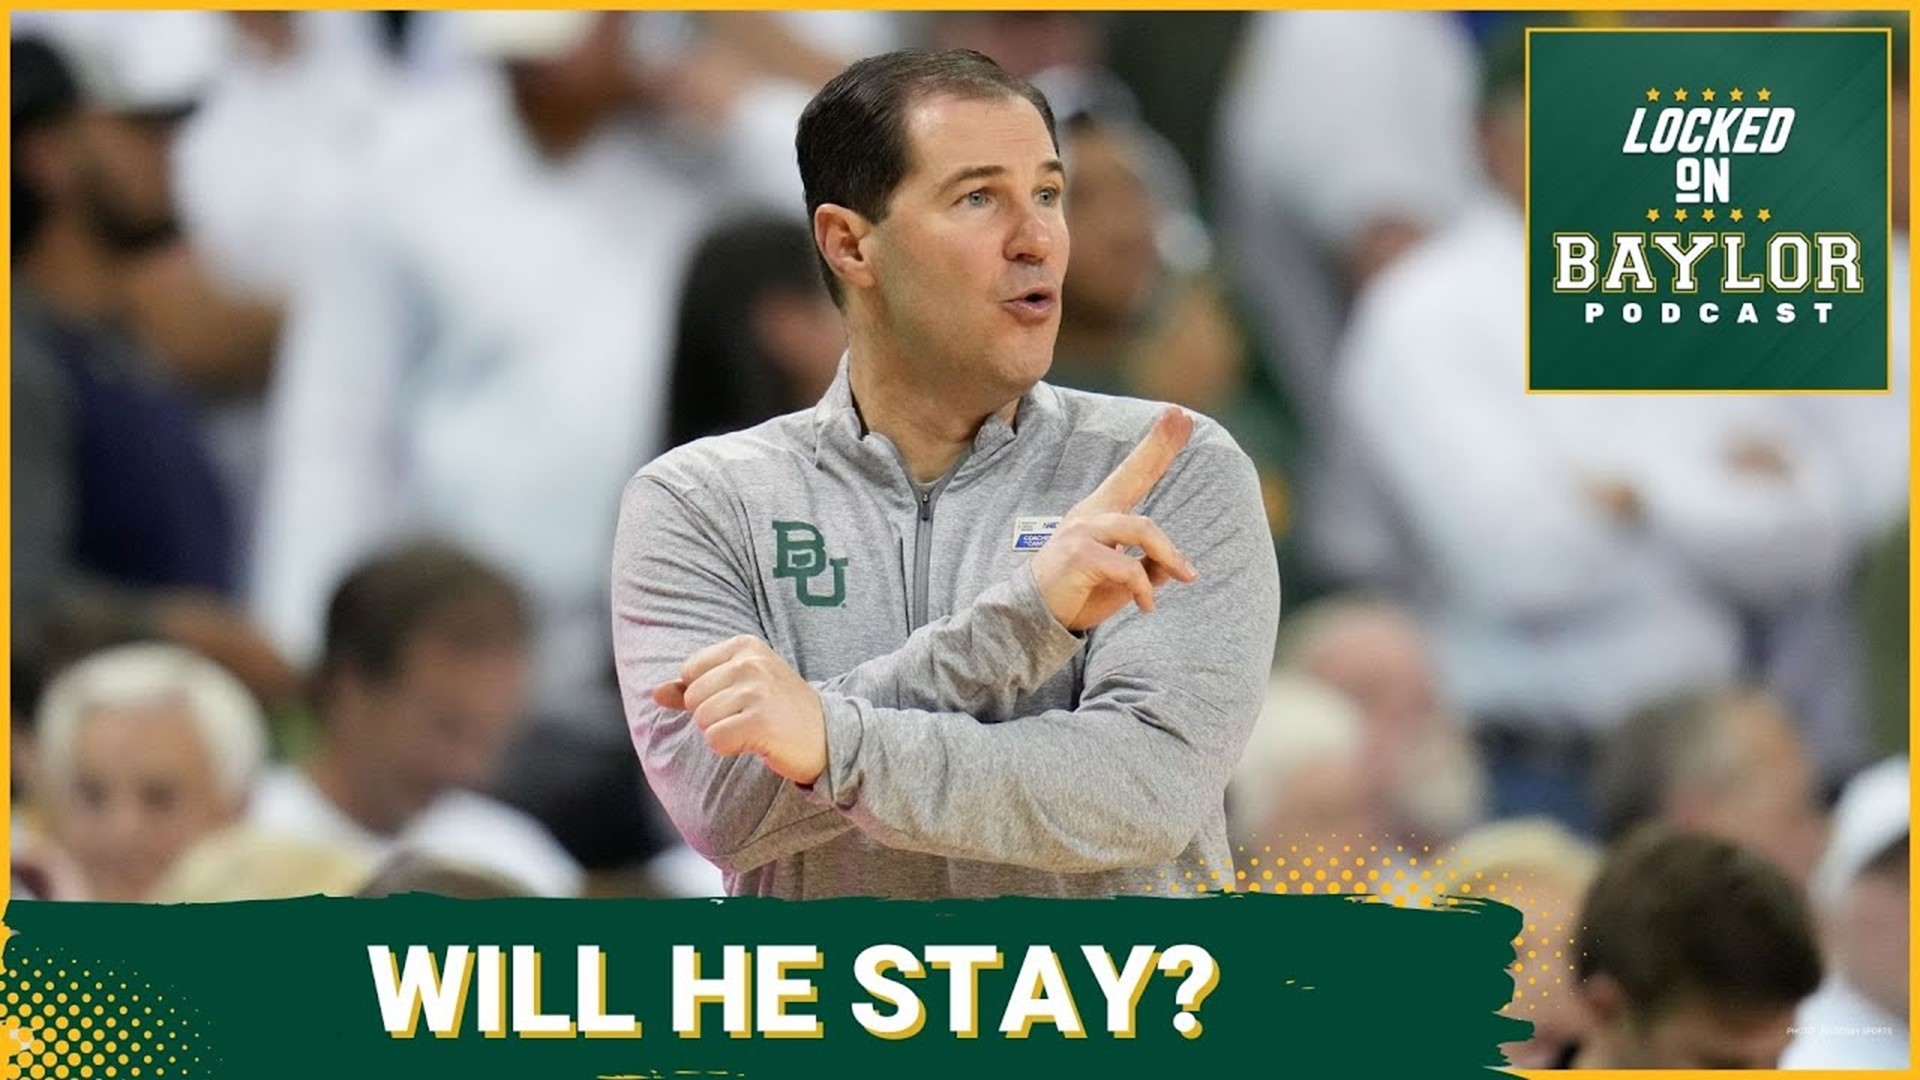 With Drew's friendship with UK Athletic Director Mitch Barnhart at the forefront, this could be the closest the Baylor coach has ever been to leaving Waco.